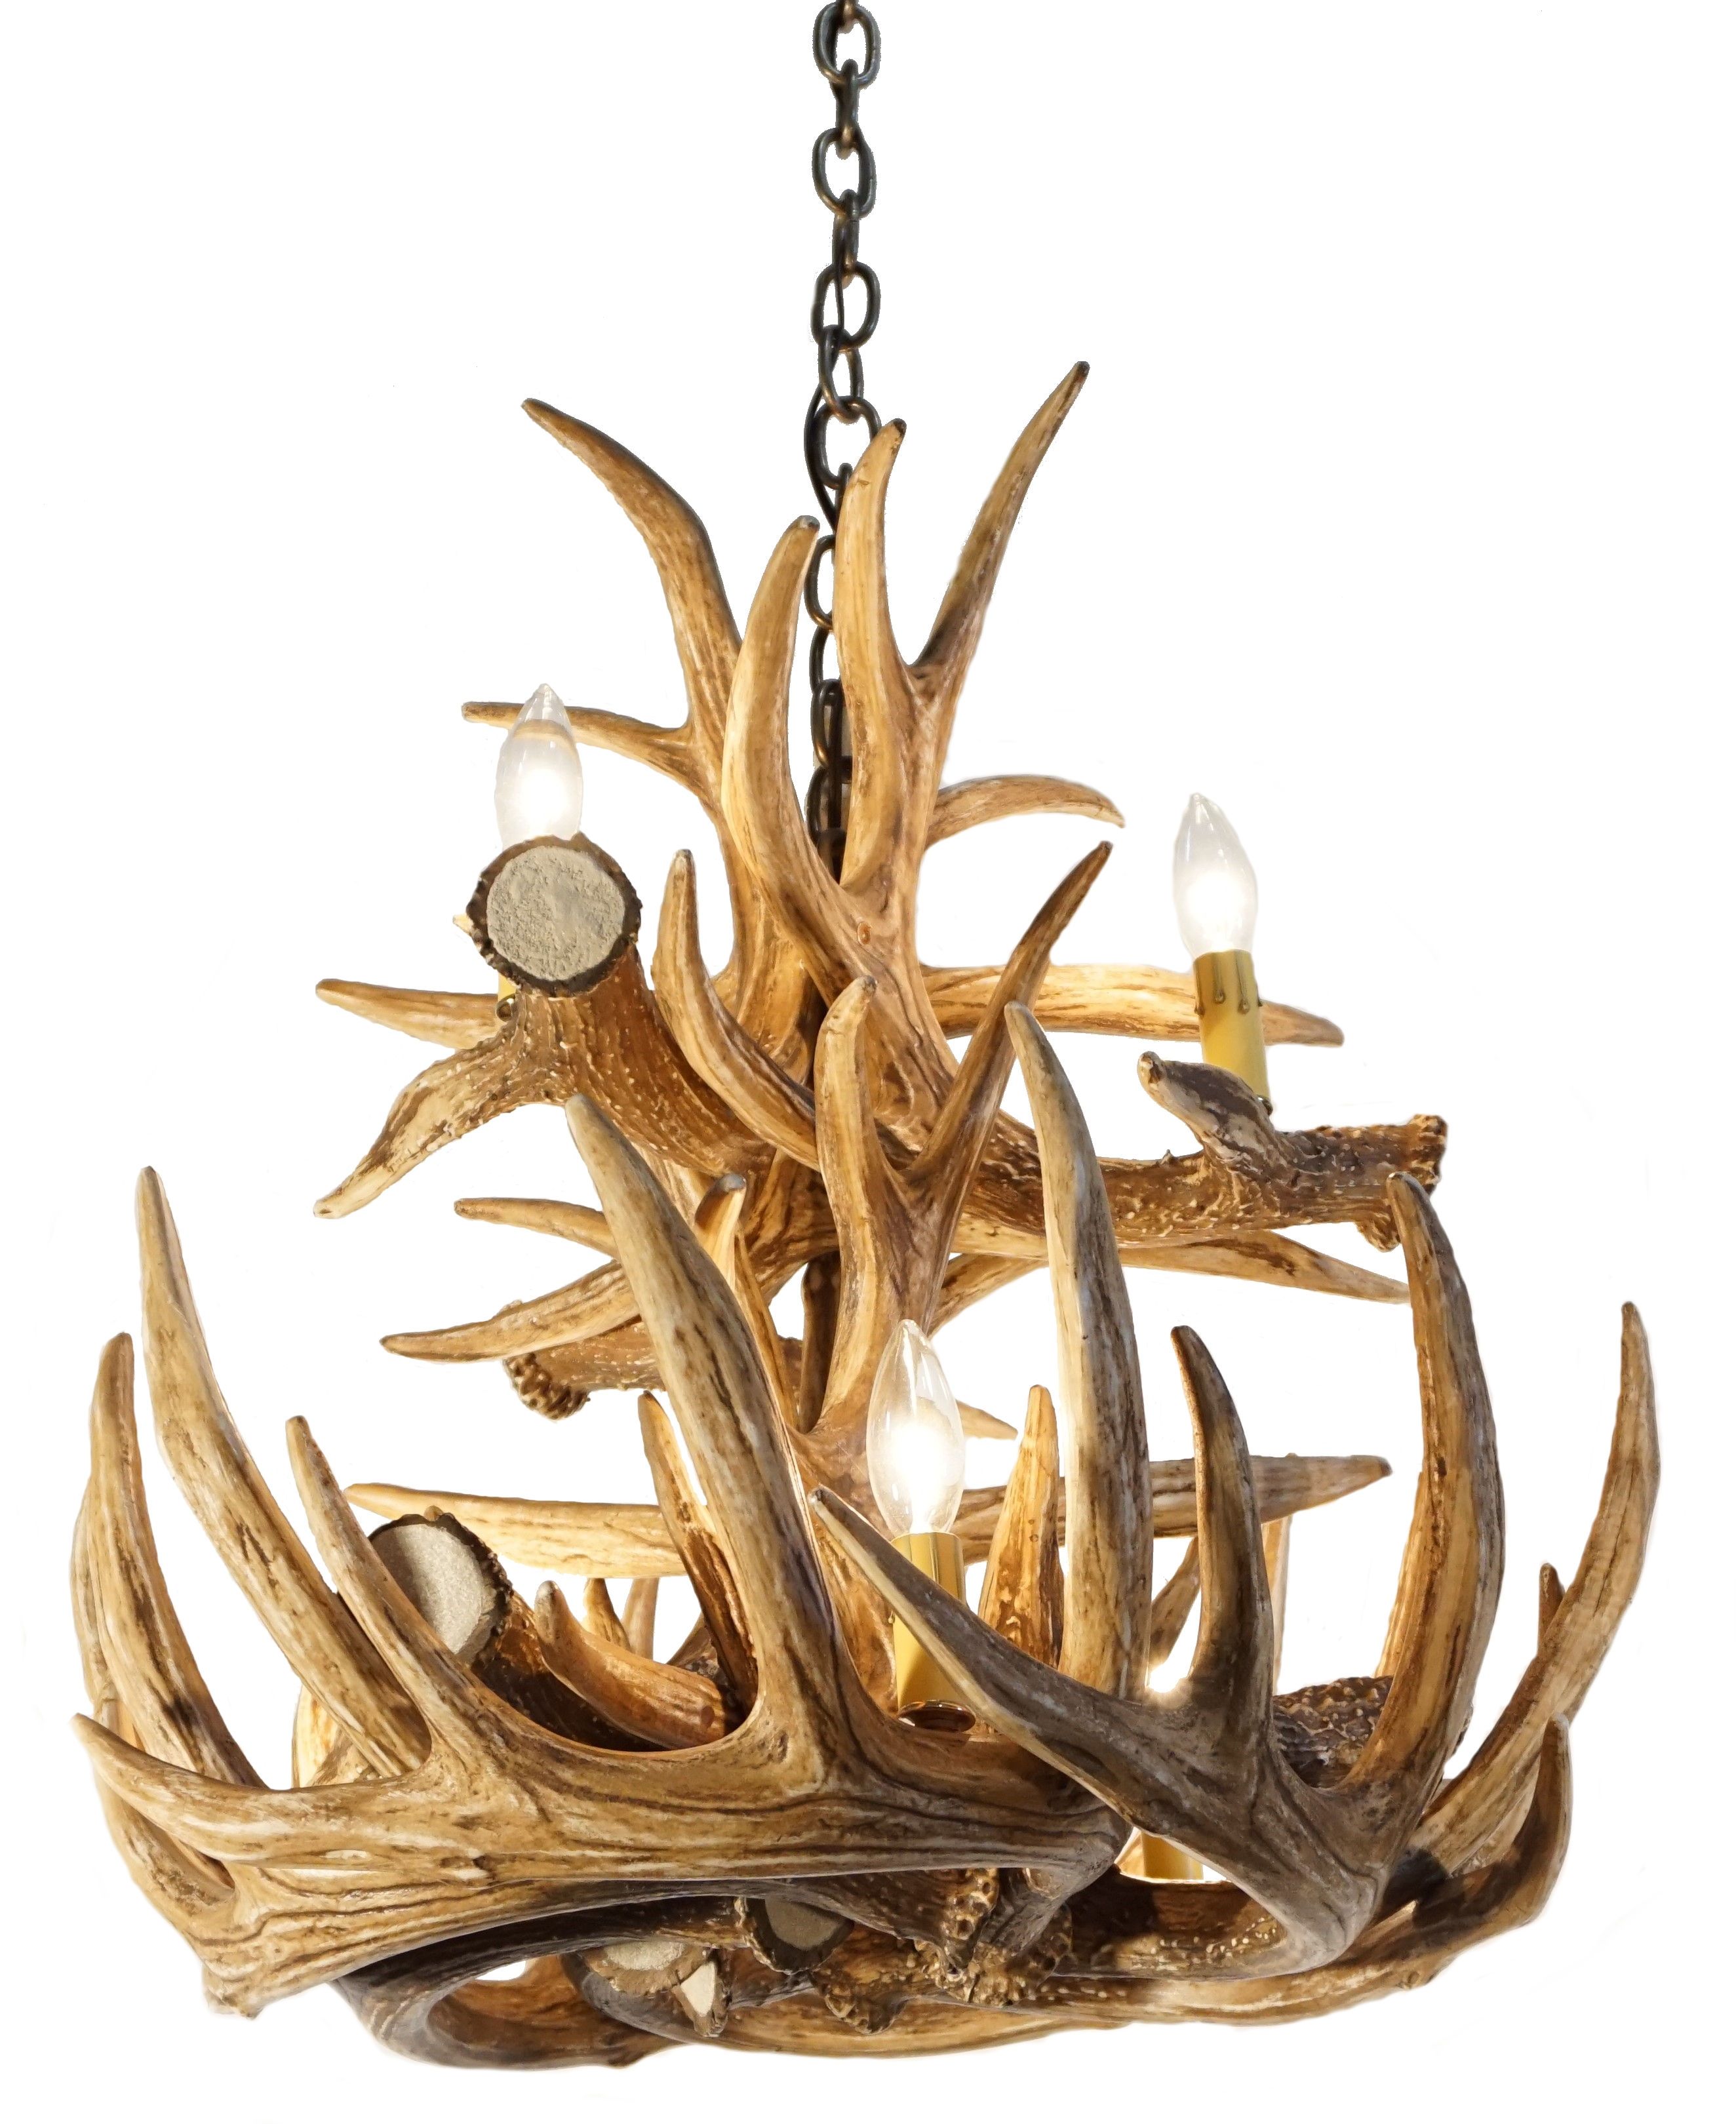 Exclusive Products Cast Horn Designs Pertaining To Antlers Chandeliers (View 6 of 15)